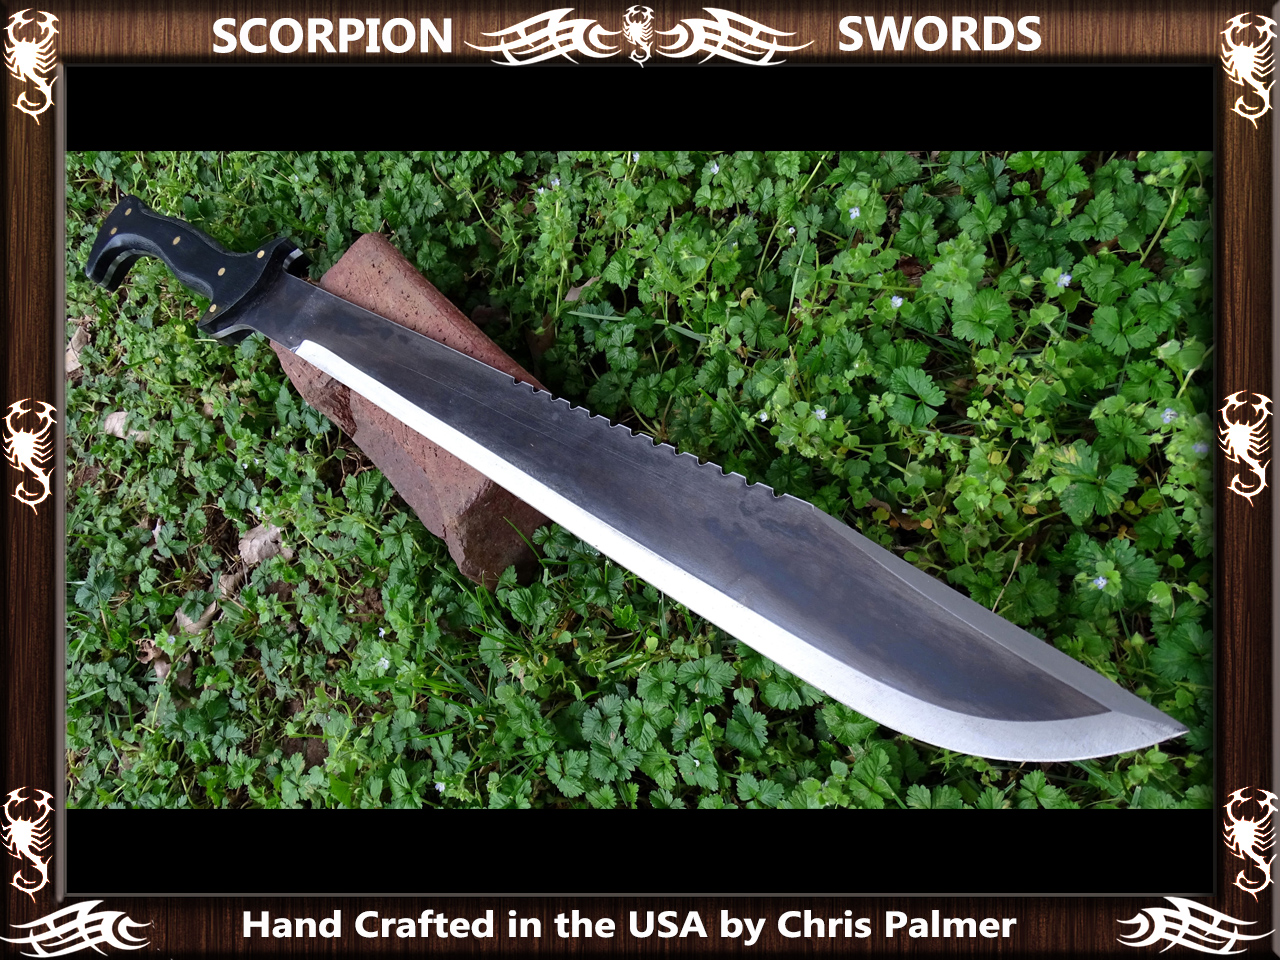 Our Jack's Knife Influenced - Scorpion Swords & Knives